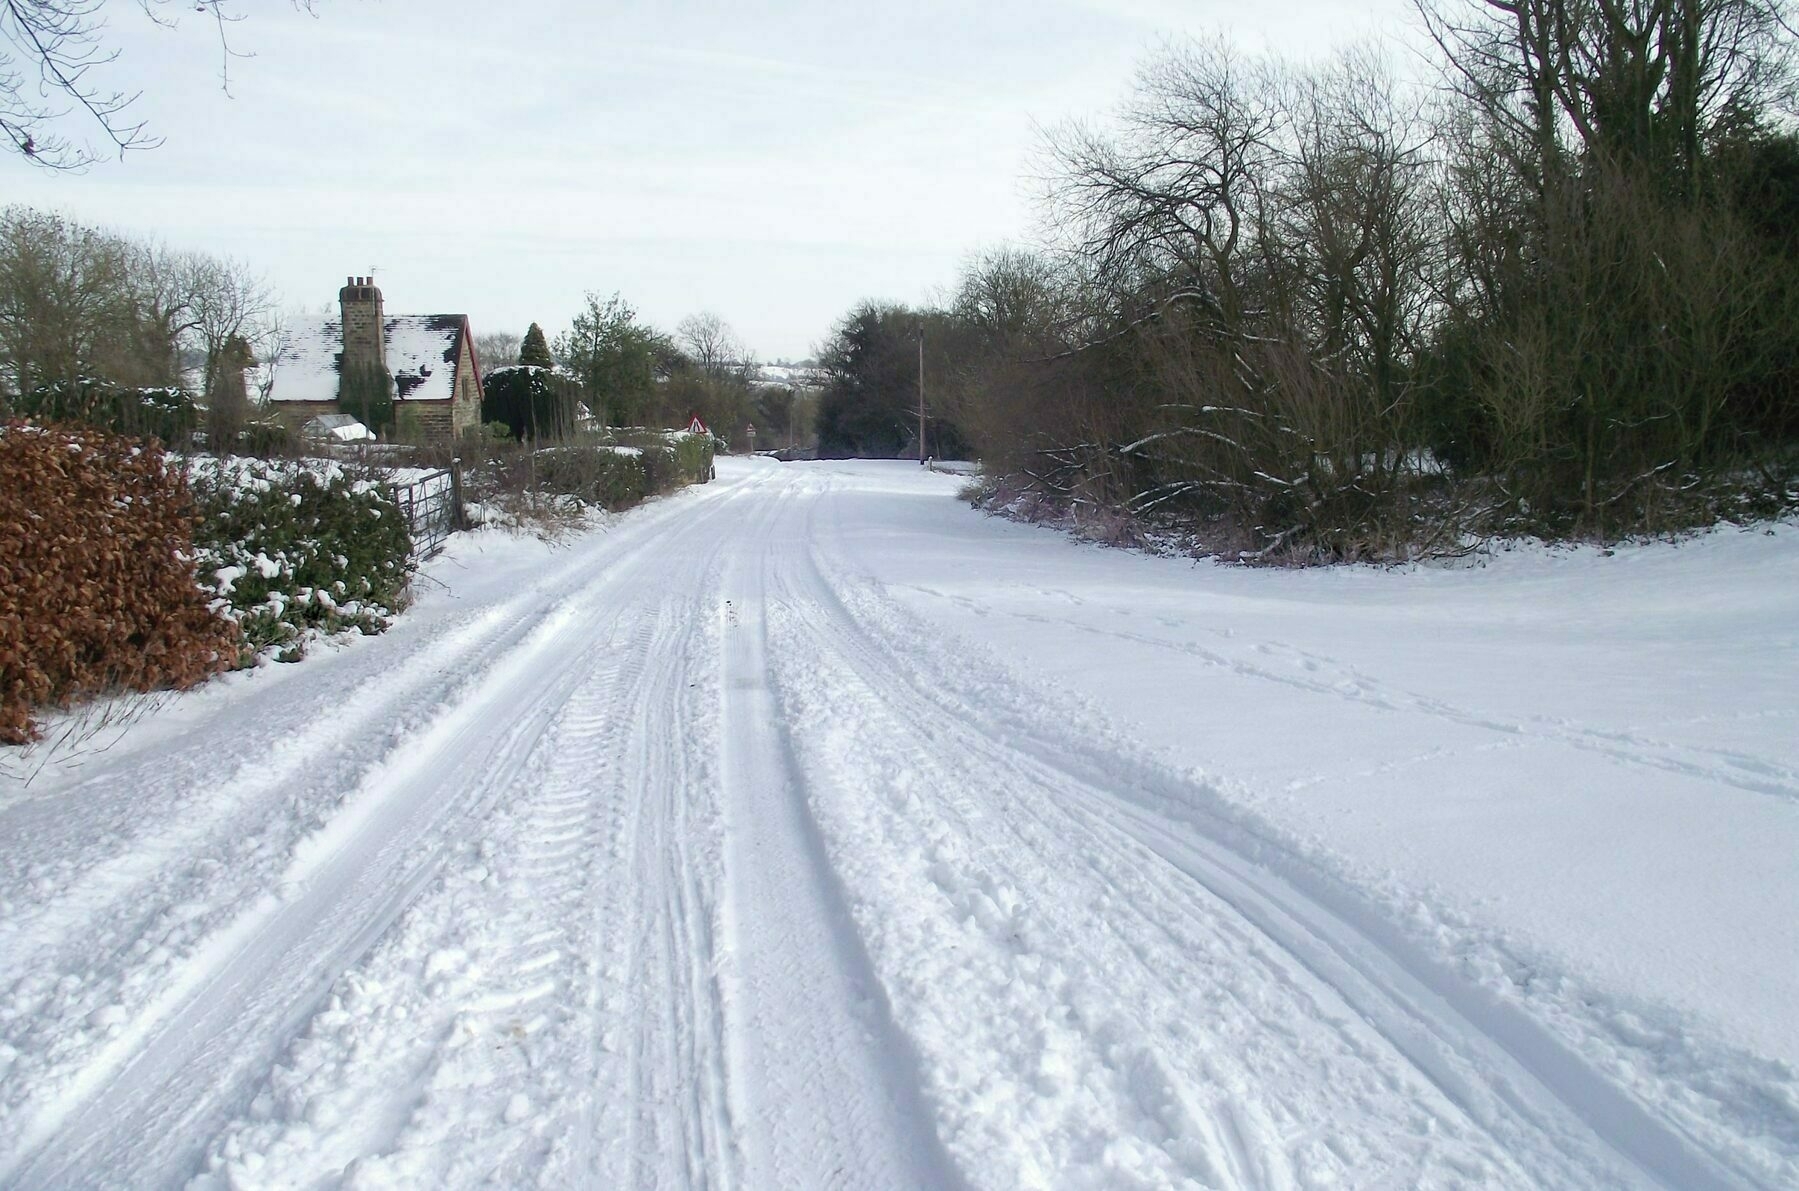 A view looking straight down the centre of a snow-covered road, there are tyre tracks leading away into the distance and trees both sides of the road.